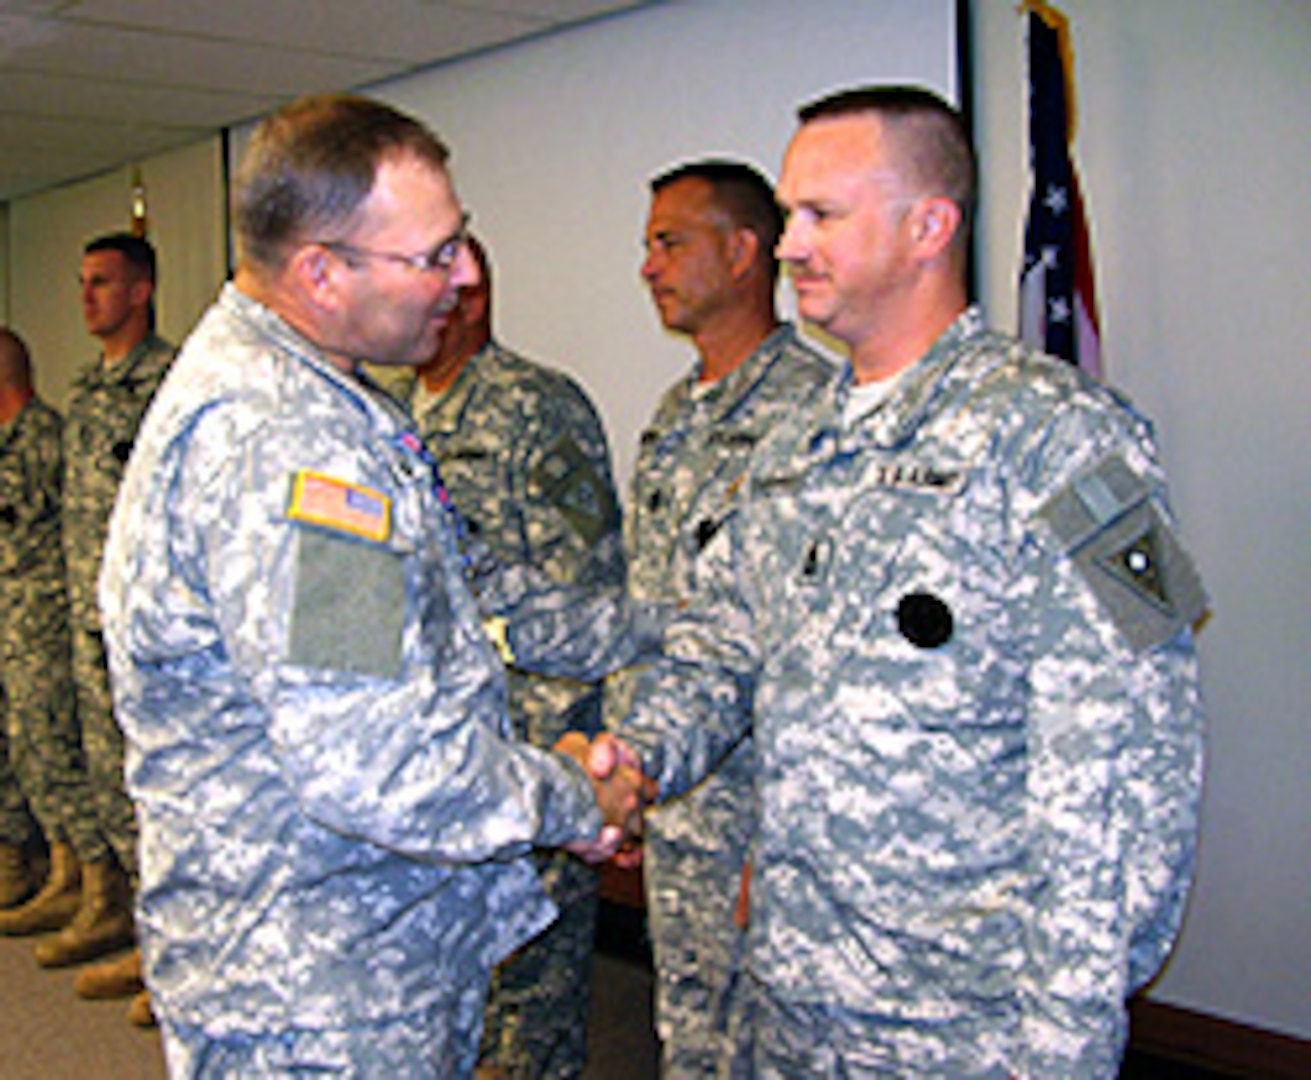 Brig. Gen. Matthew L. Kambic, Ohio's assistant adjutant general for Army, congratulates 1st Sgt. Jeff Collingsworth on his promotion to first sergeant in the Ohio Army National Guard Recruiting and Retention Battalion. Collingsworth is the Area Noncommissioned Officer in Charge of the Central Recruiting Area.